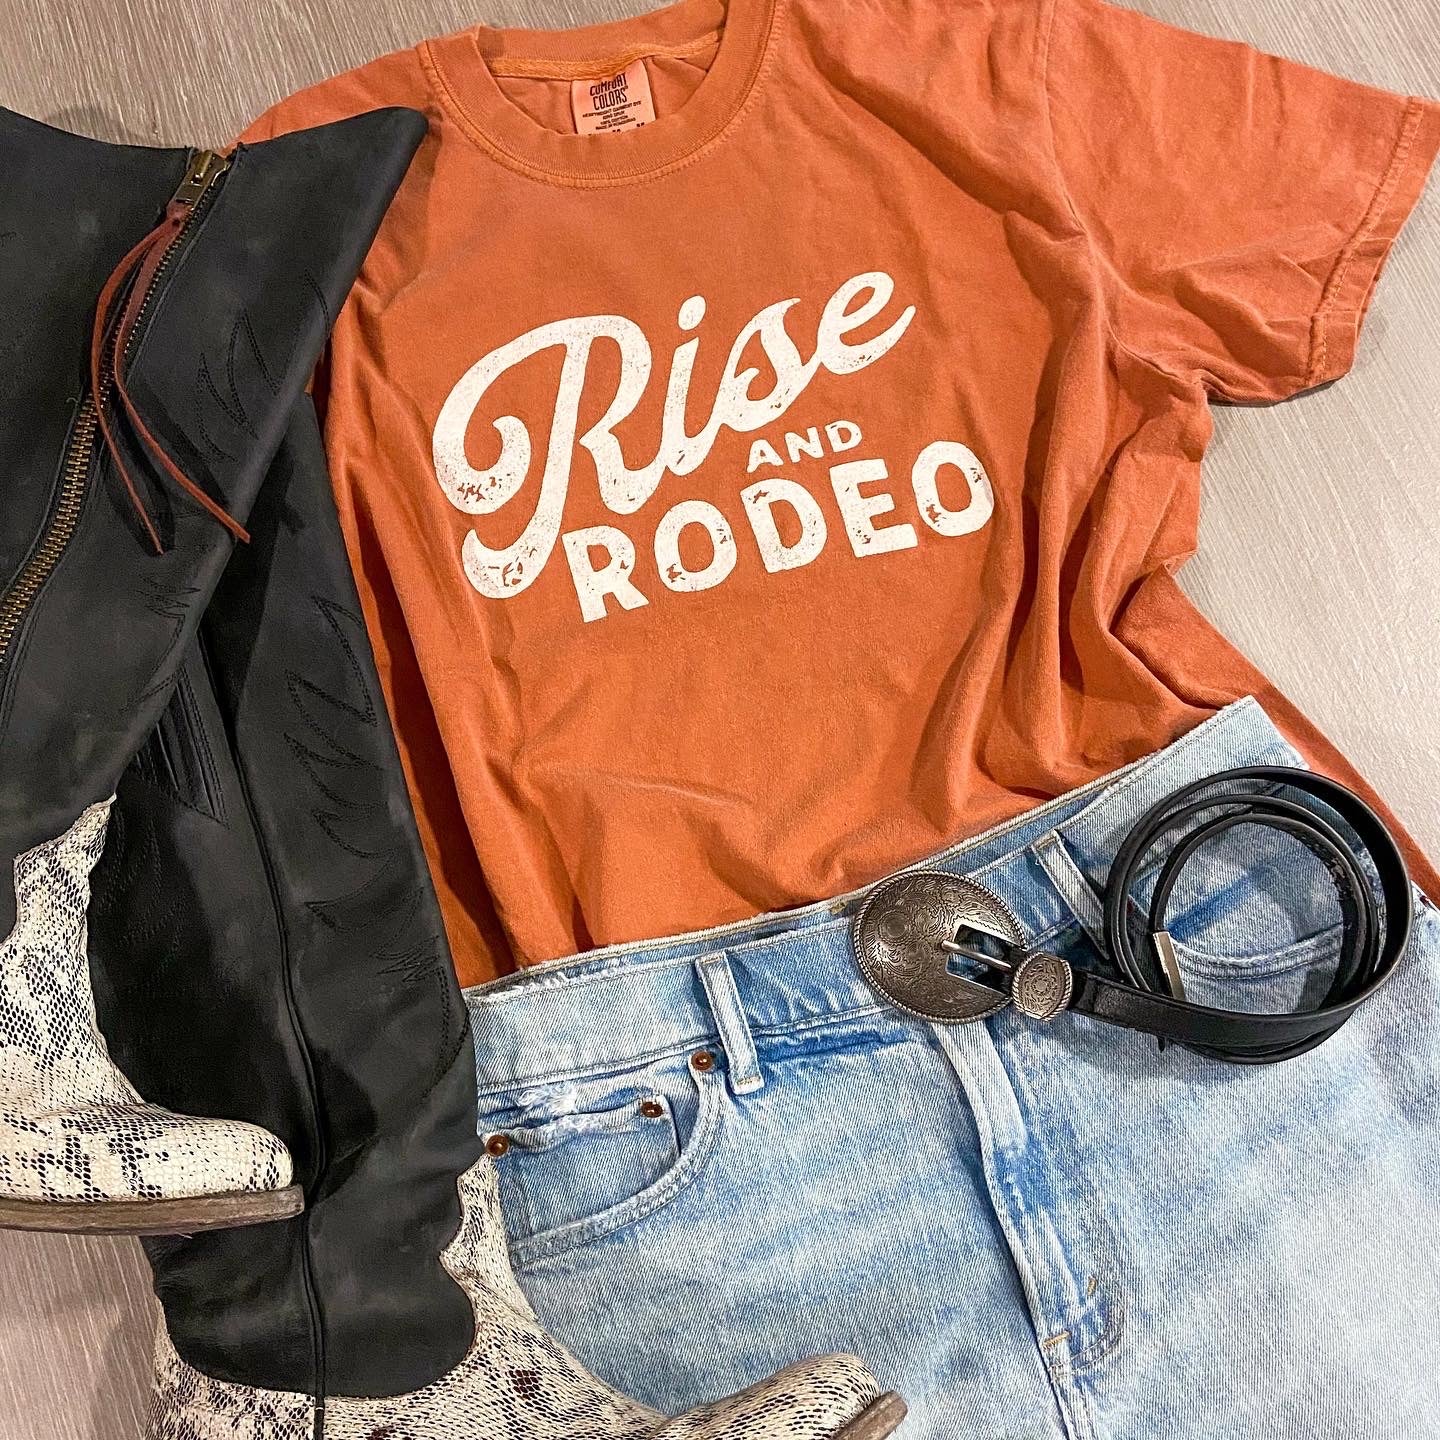 "Rise & Rodeo" Graphic T-Shirt